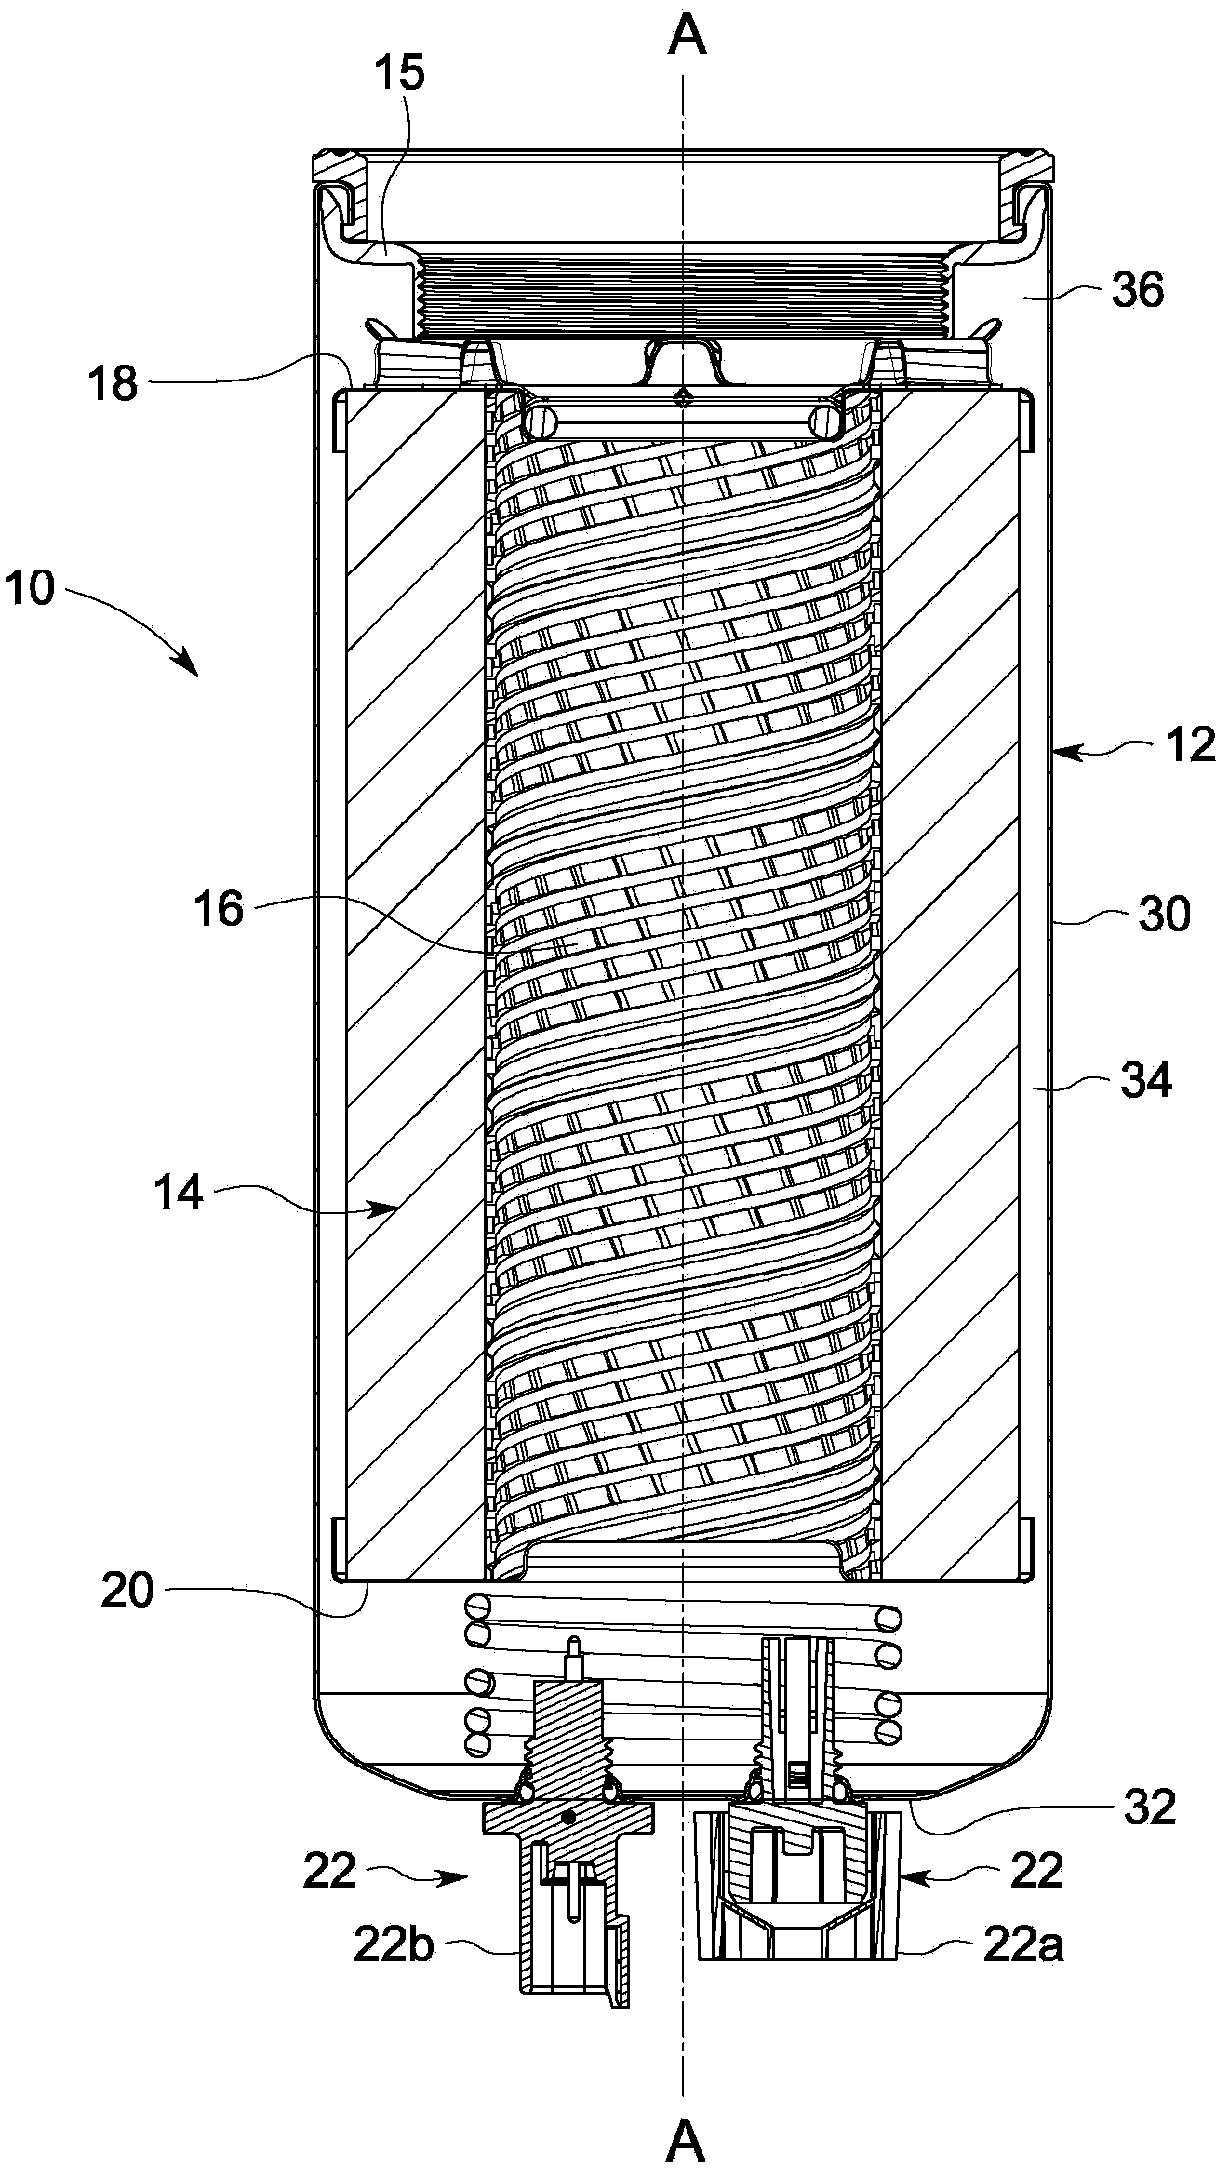 Filter housing with integrally threaded port